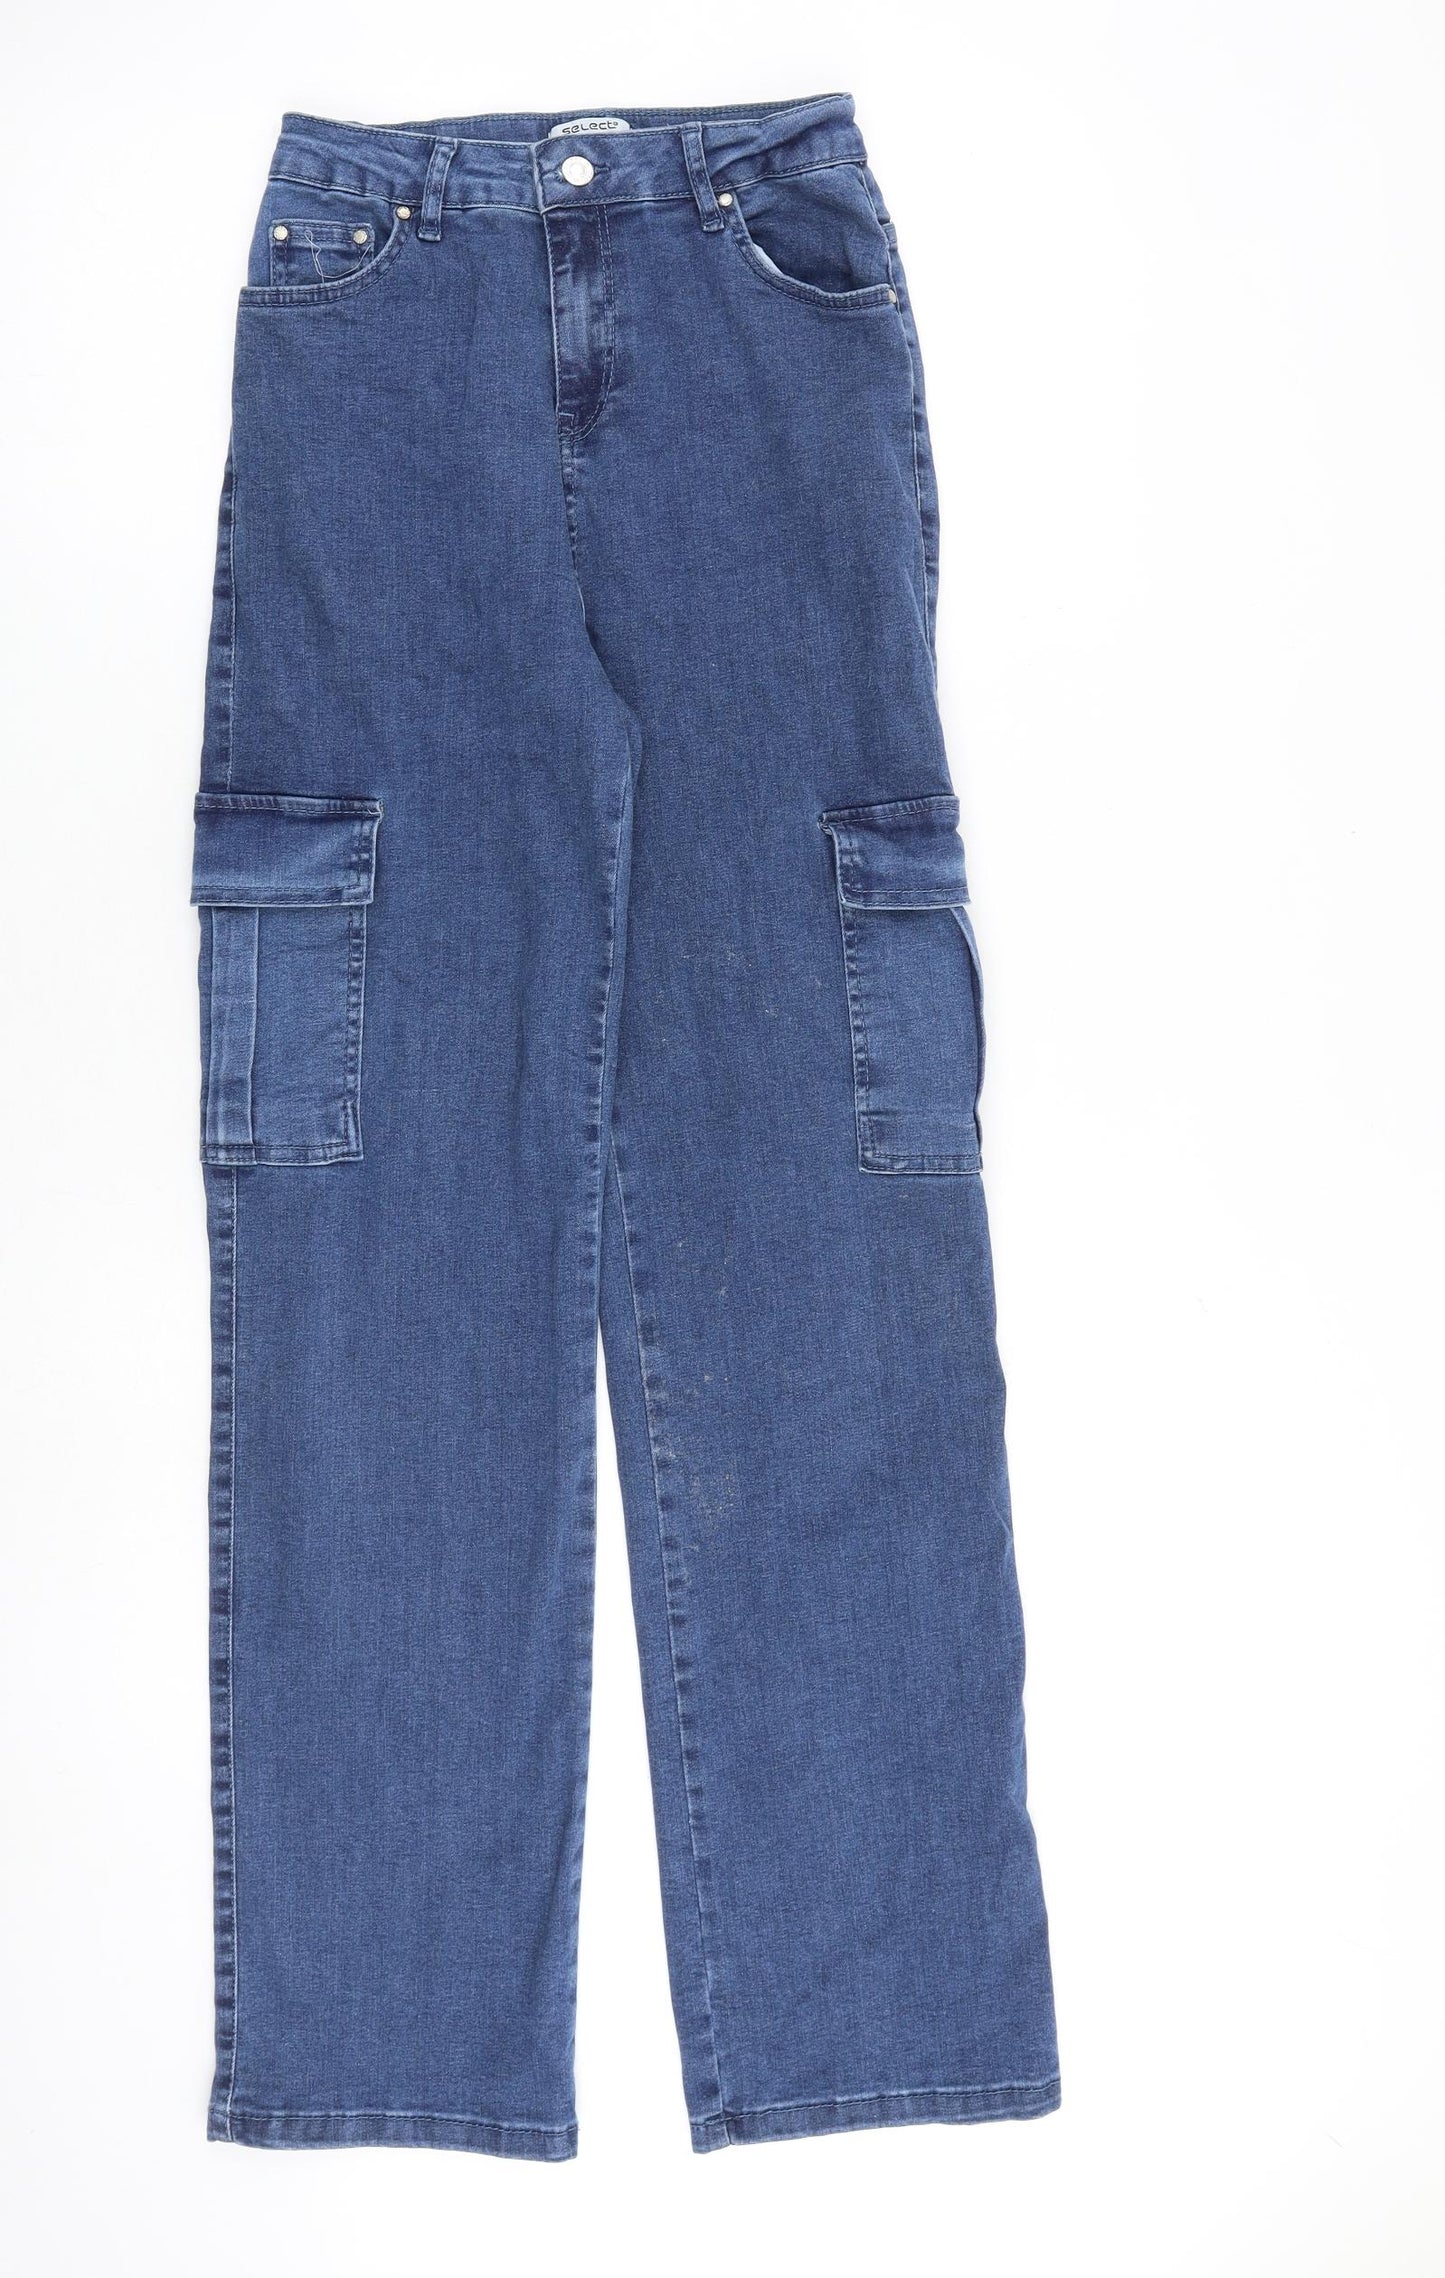 Select Womens Blue Cotton Straight Jeans Size 8 L32 in Regular Zip - Cargo